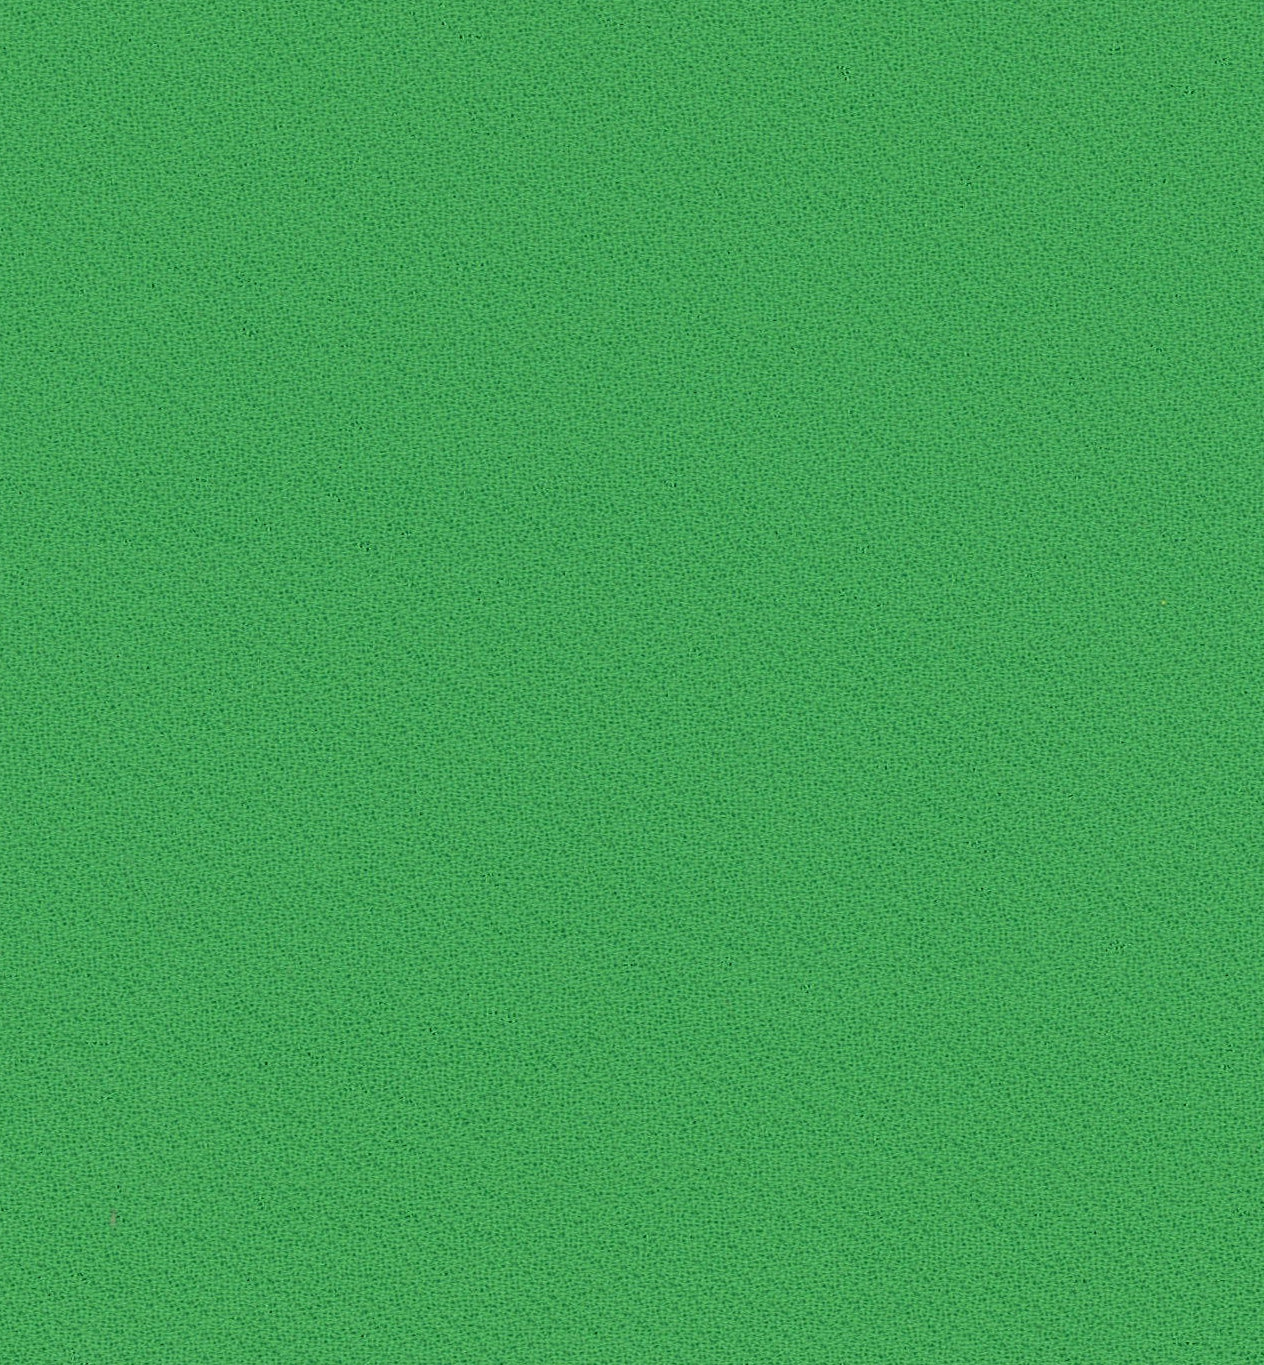 35005-04 Green Polyester Plain Dyed 280g/yd 54" green plain dyed polyester woven Solid Color - knit fabric - woven fabric - fabric company - fabric wholesale - fabric b2b - fabric factory - high quality fabric - hong kong fabric - fabric hk - acetate fabric - cotton fabric - linen fabric - metallic fabric - nylon fabric - polyester fabric - spandex fabric - chun wing hing - cwh hk - fabric worldwide ship - 針織布 - 梳織布 - 布料公司- 布料批發 - 香港布料 - 秦榮興